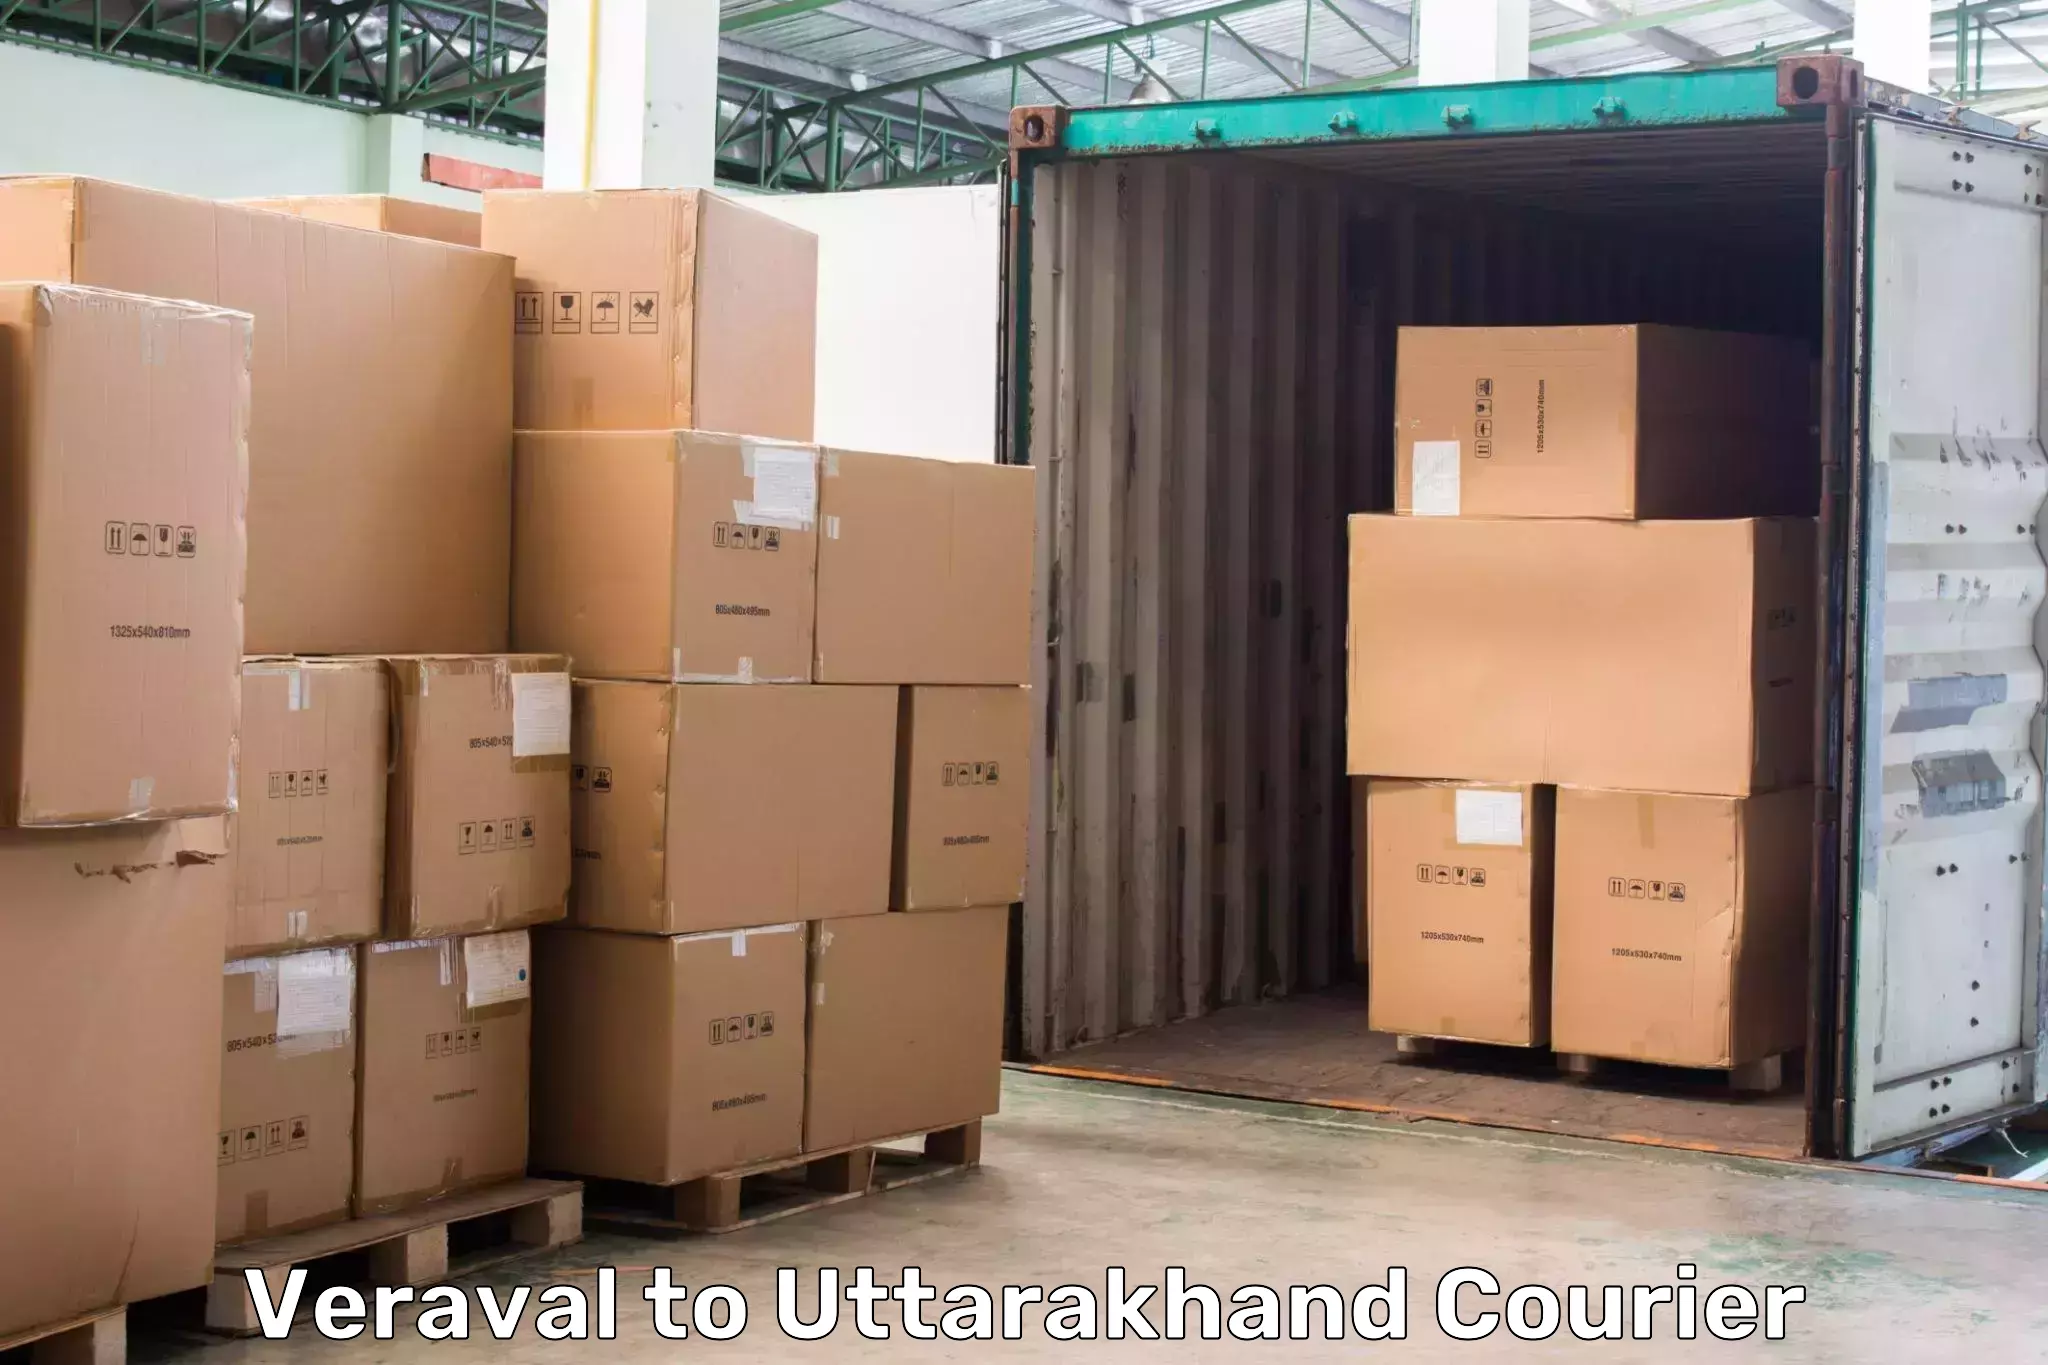 24/7 courier service in Veraval to Uttarakhand